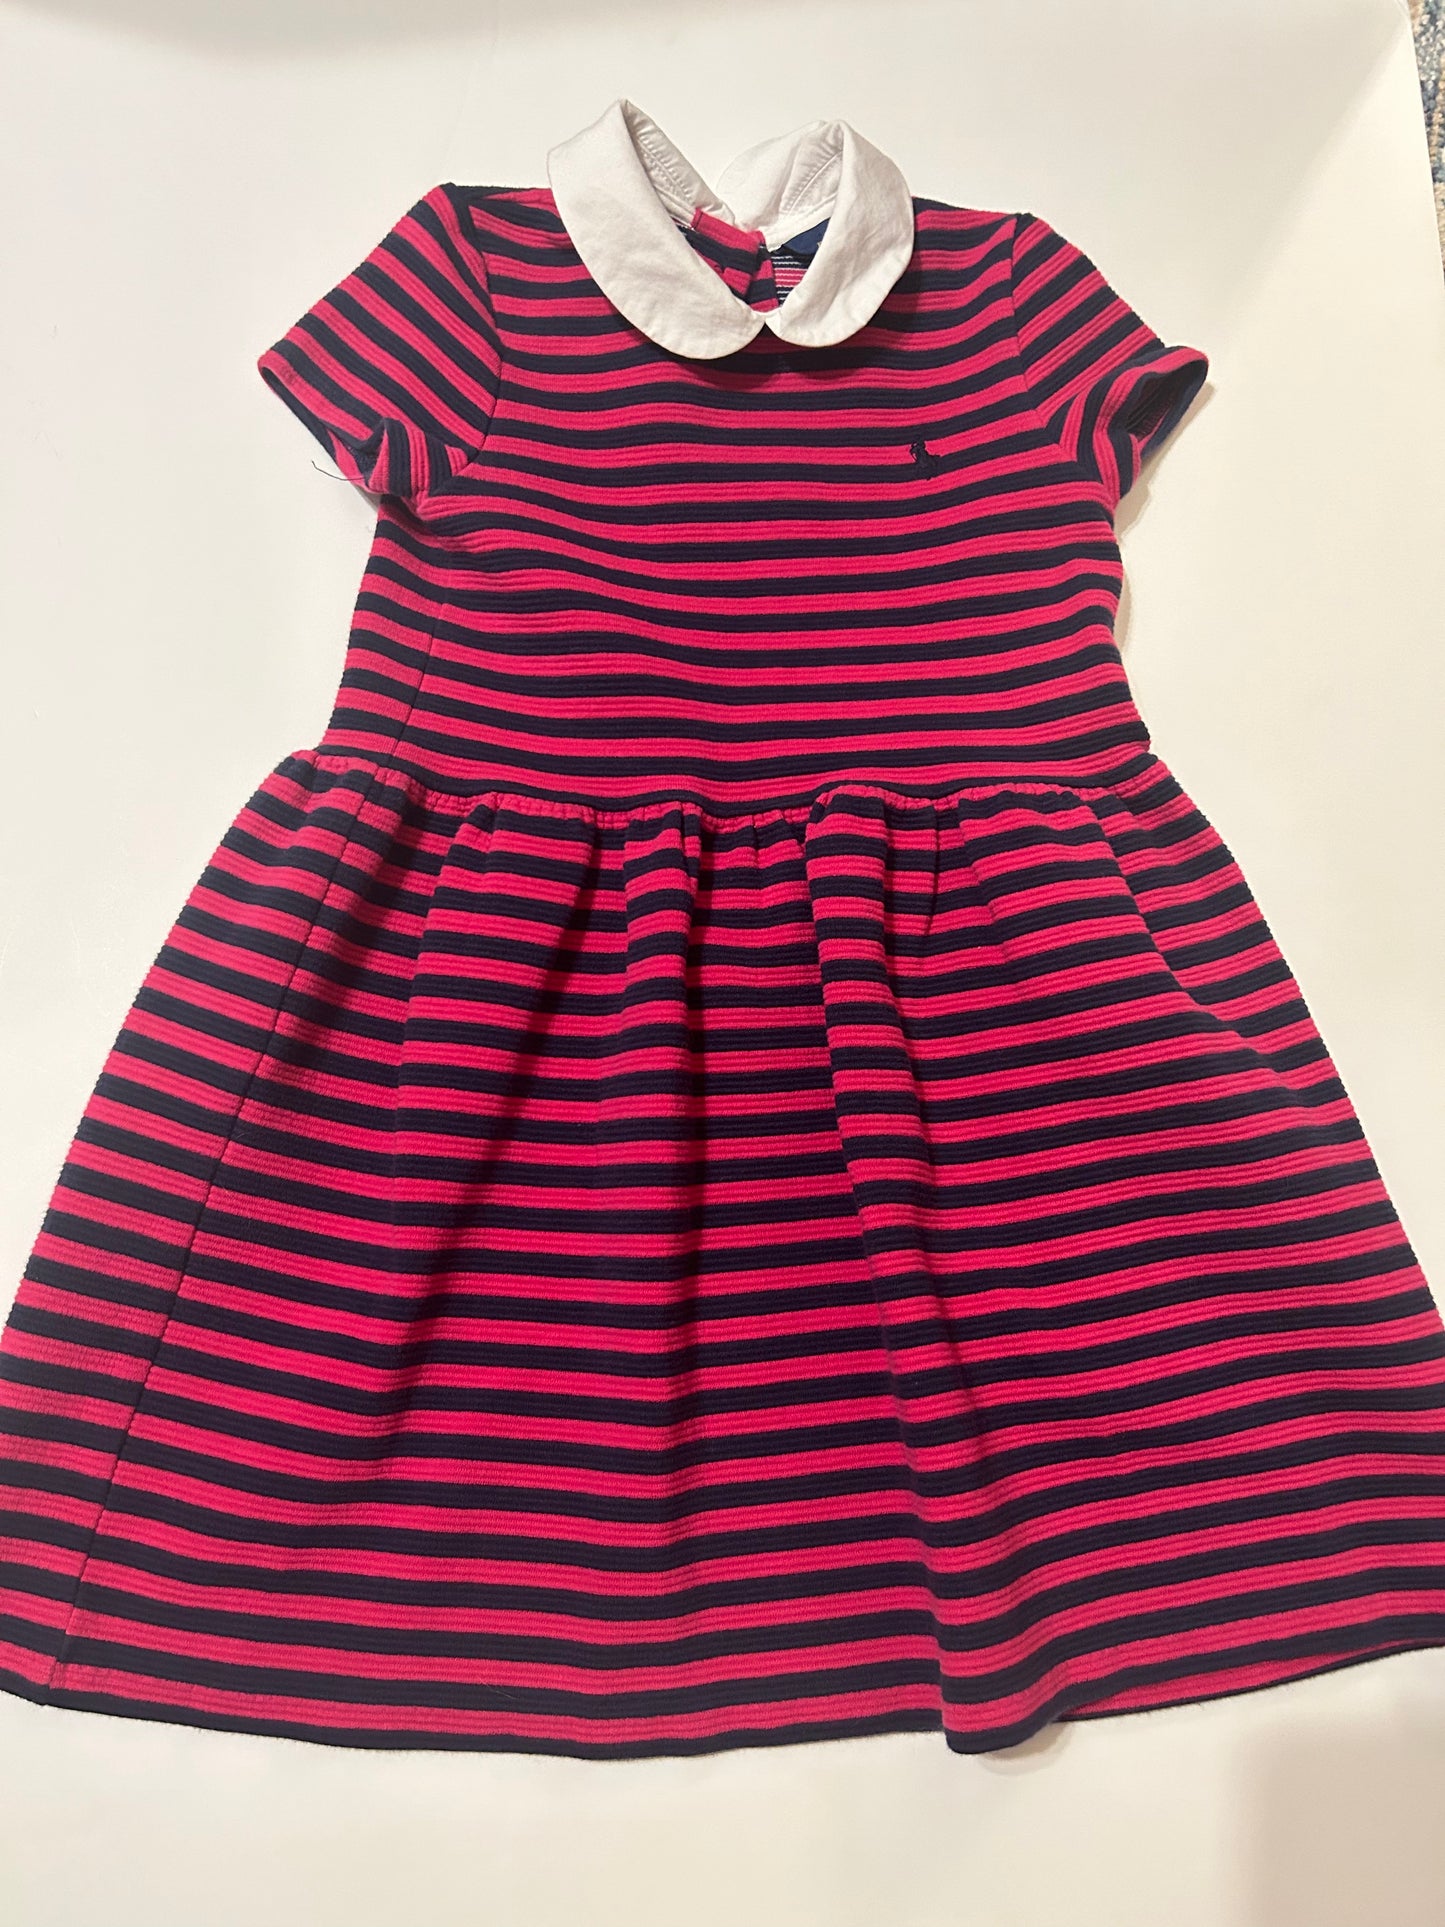 REDUCED Polo Ralph Lauren 5T EUC navy and dark pink 45227